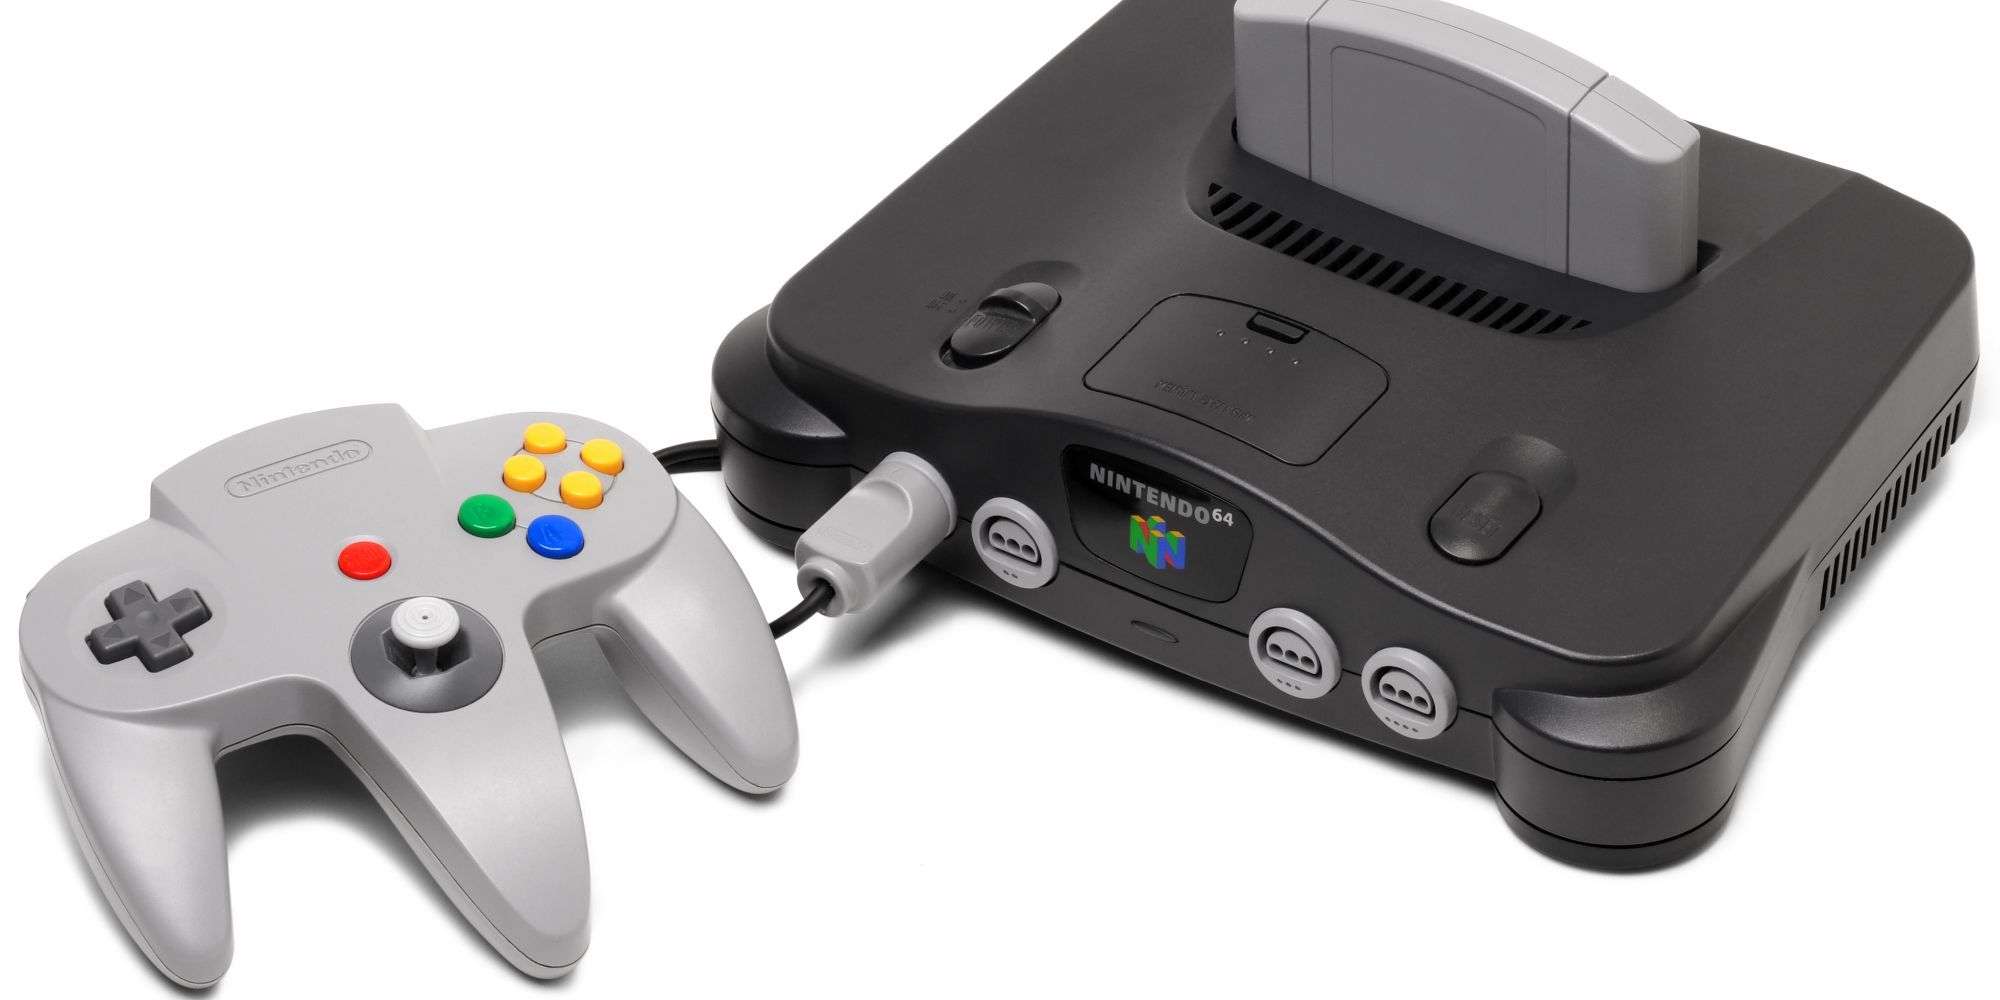 A Nintendo 64 with a controller attached and a blank cartridge inserted